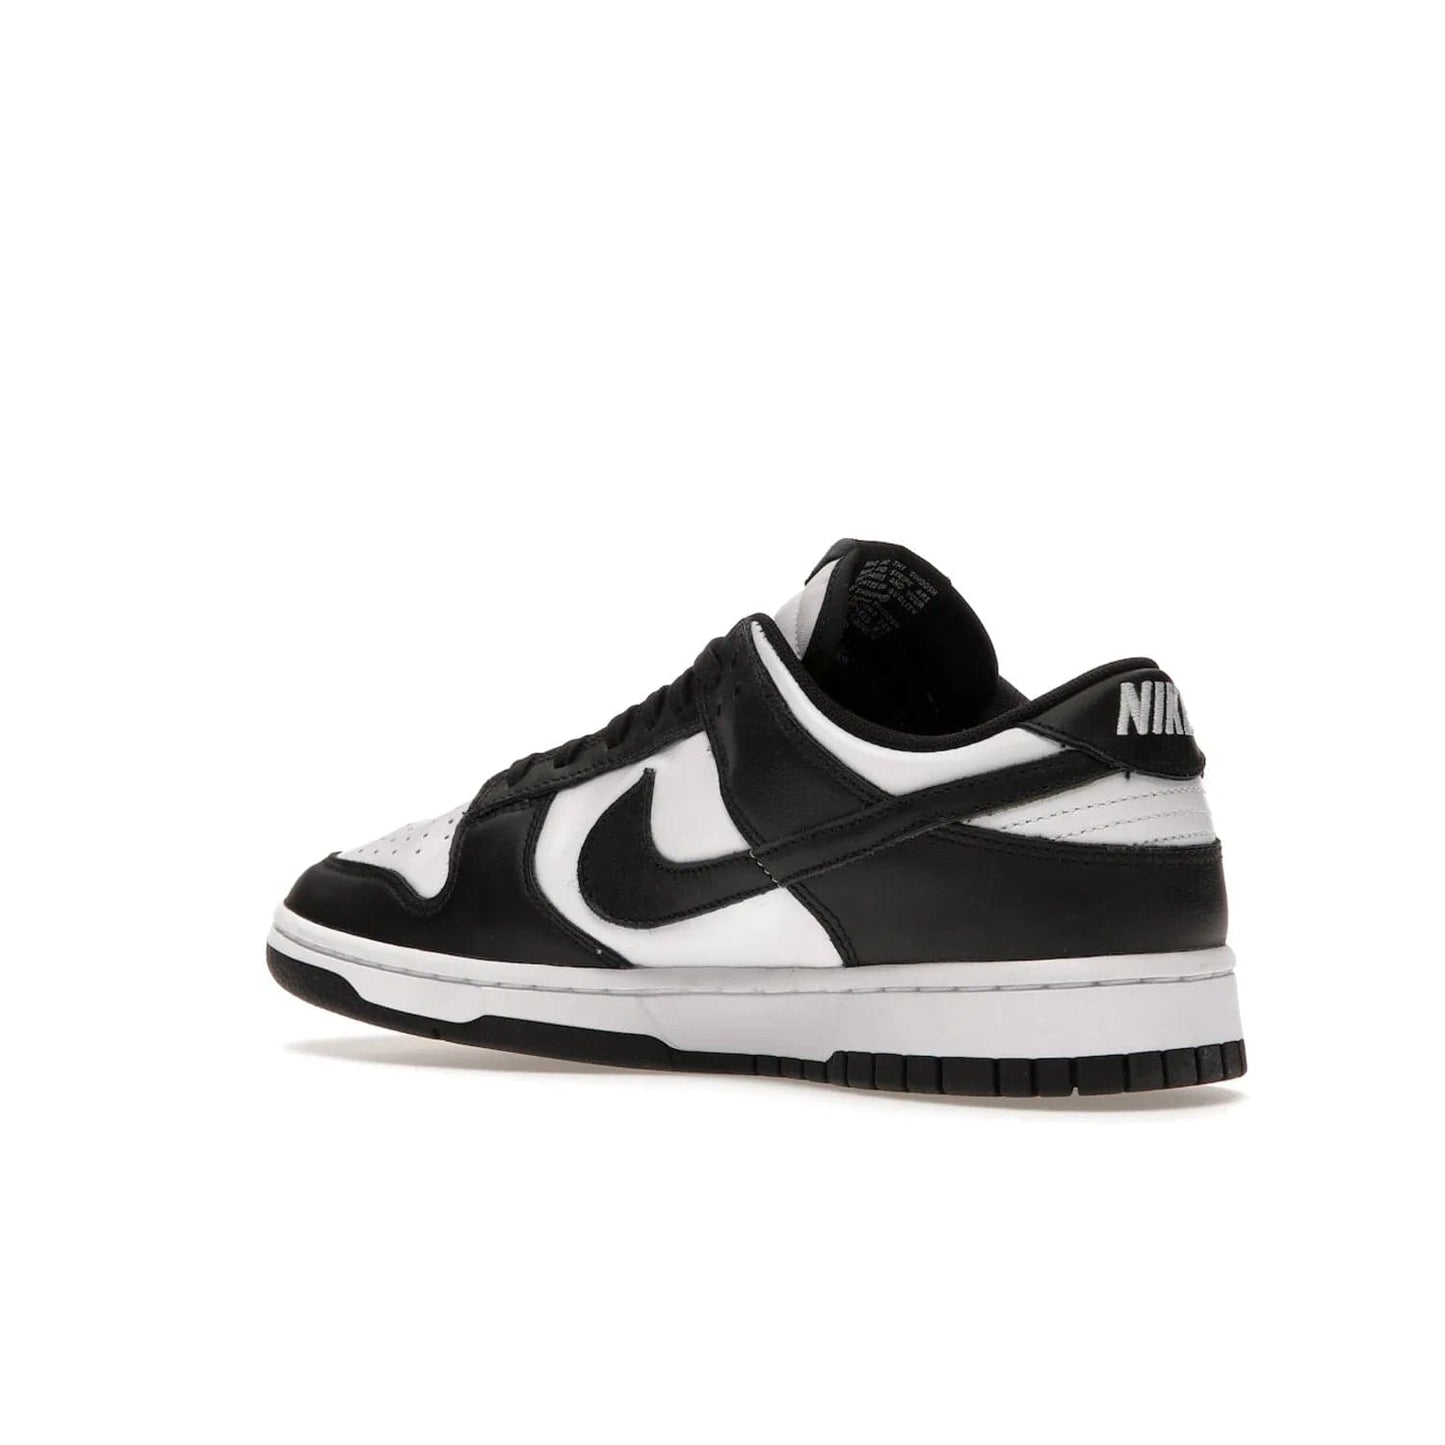 Nike Dunk Low Retro White Black Panda (2021) - Image 23 - Only at www.BallersClubKickz.com - Shop the Nike Dunk Low Retro White Black for classic styling featuring white leather with black leather overlays and classic Nike branding. Released in 2021, this timeless design offers a white midsole and black outsole for a stylish look. Shop all the Nike Dunks & rock this classic look.